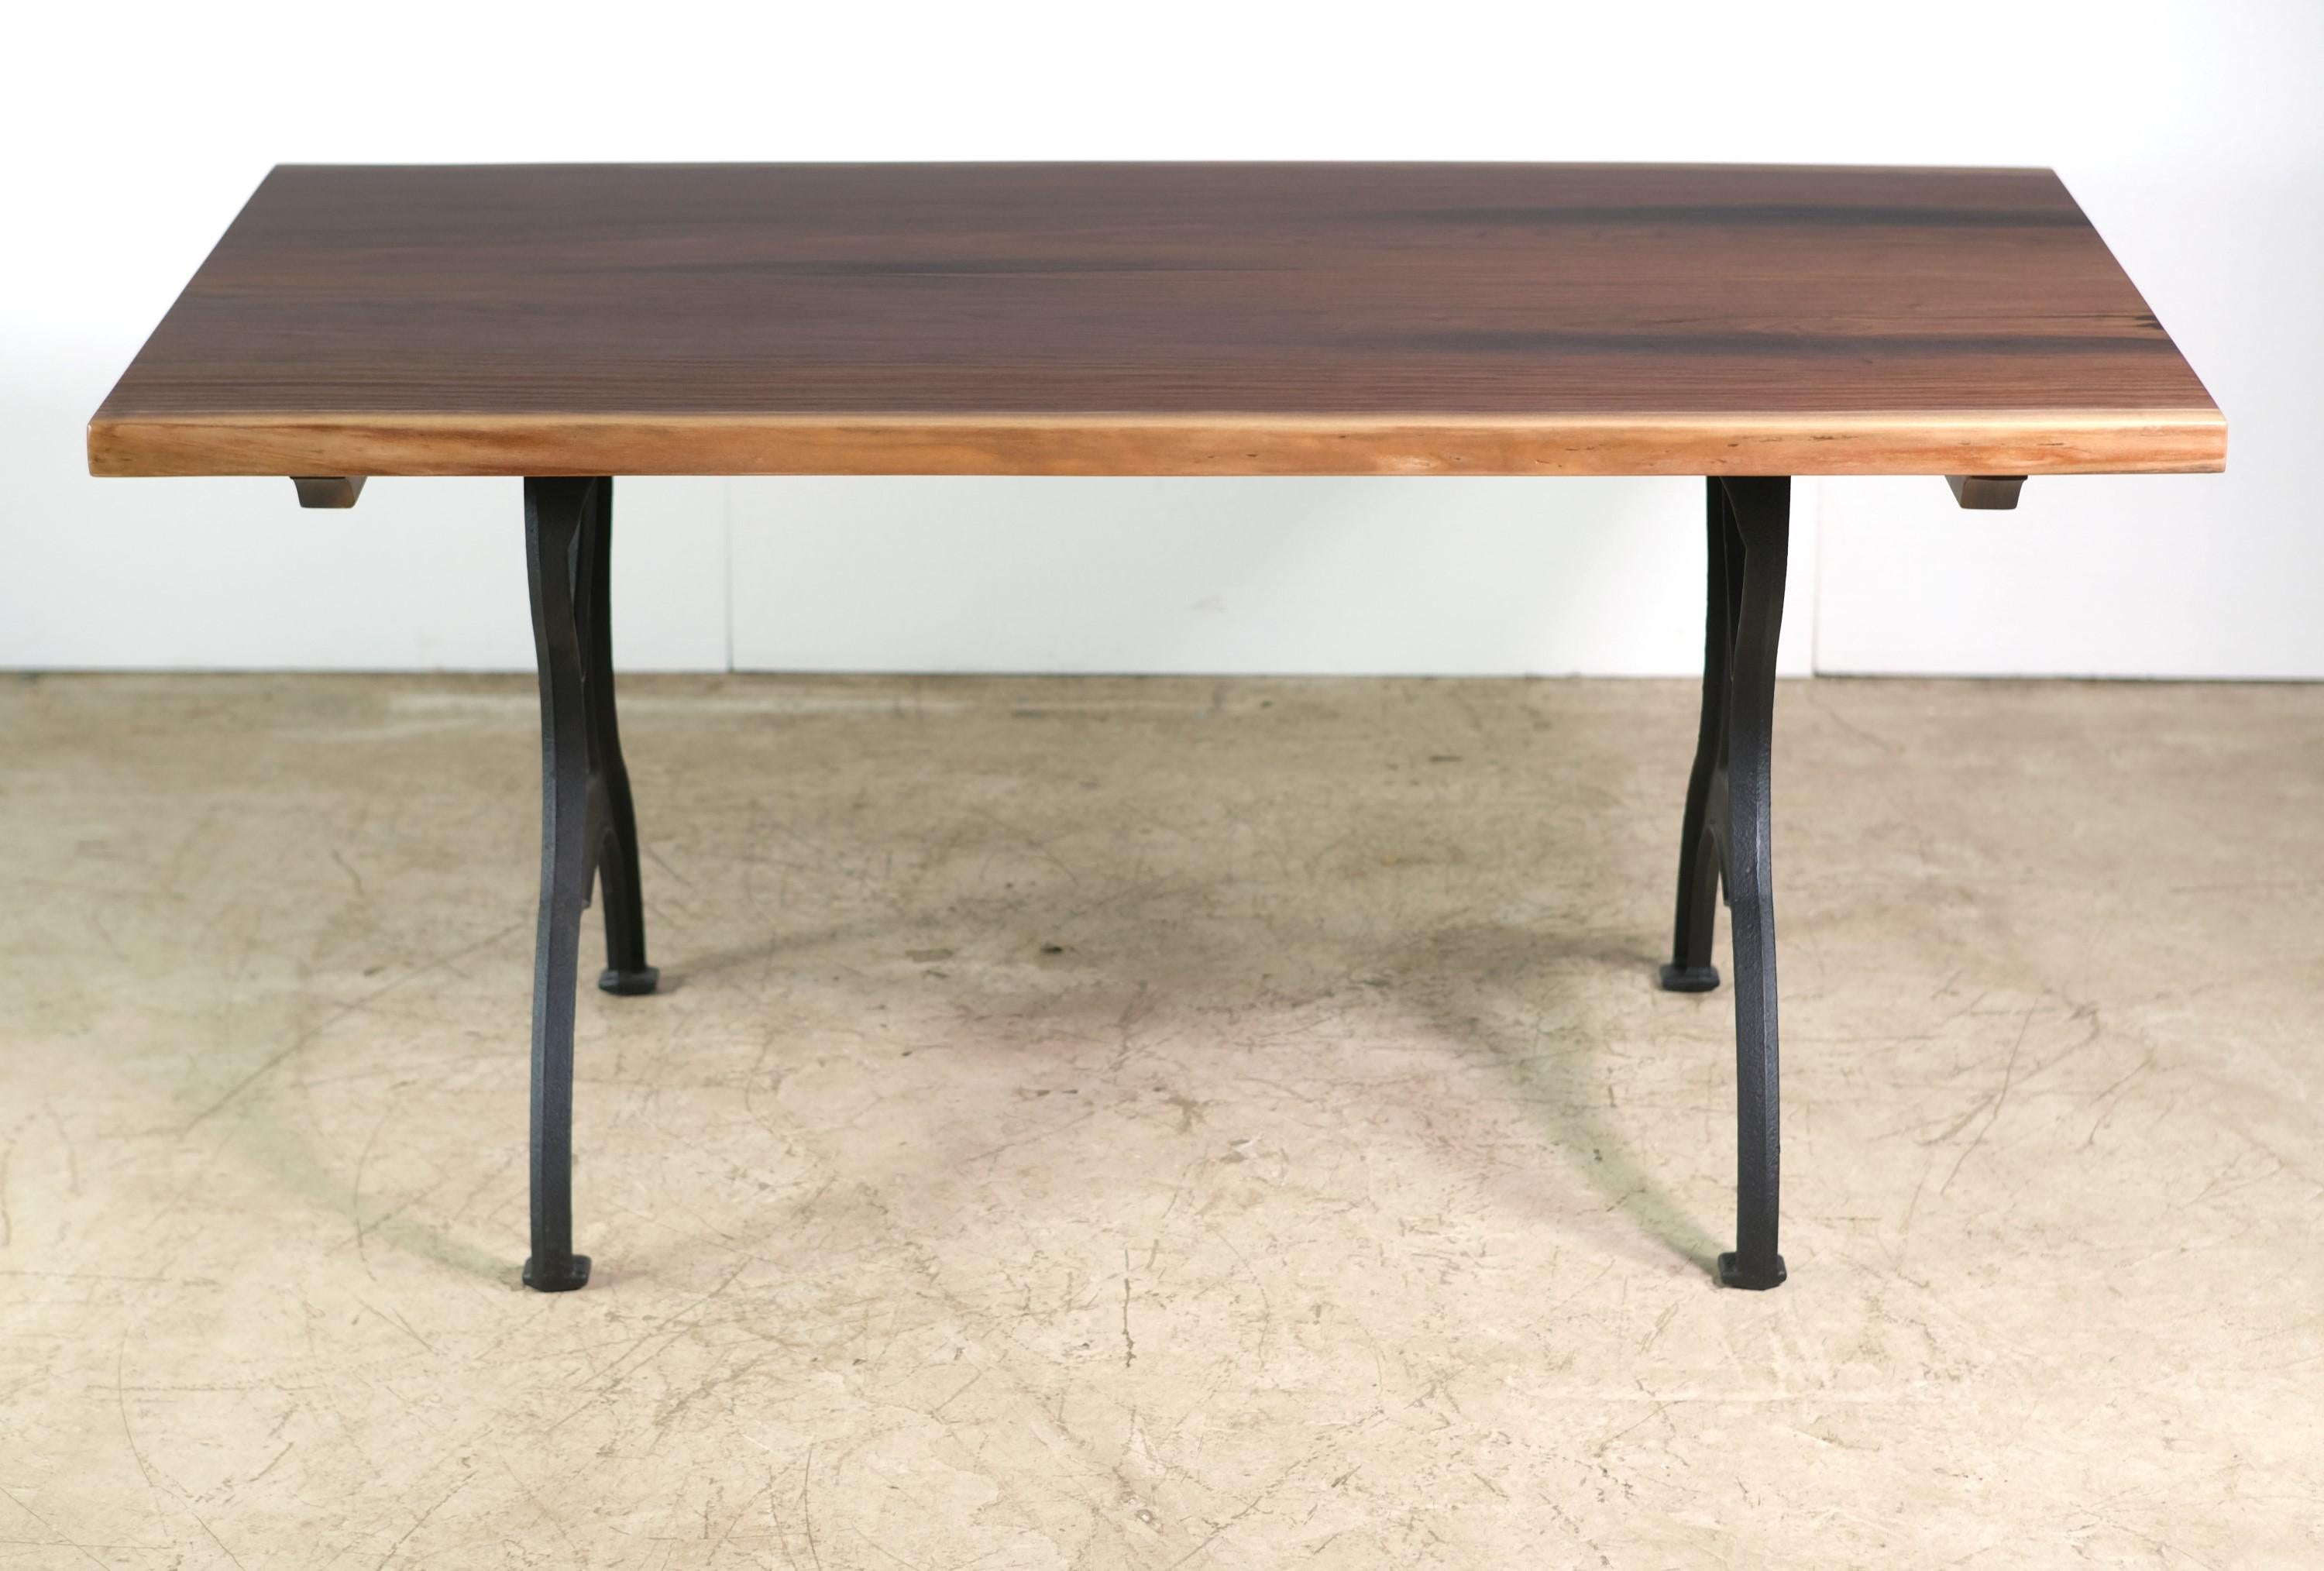 This table features a two slab live edge walnut top with a Rubio Monocoat over epoxy finish paired with Brooklyn New York cast iron legs. This table is ready to ship. Please note, this item is located in our Scranton, PA location.